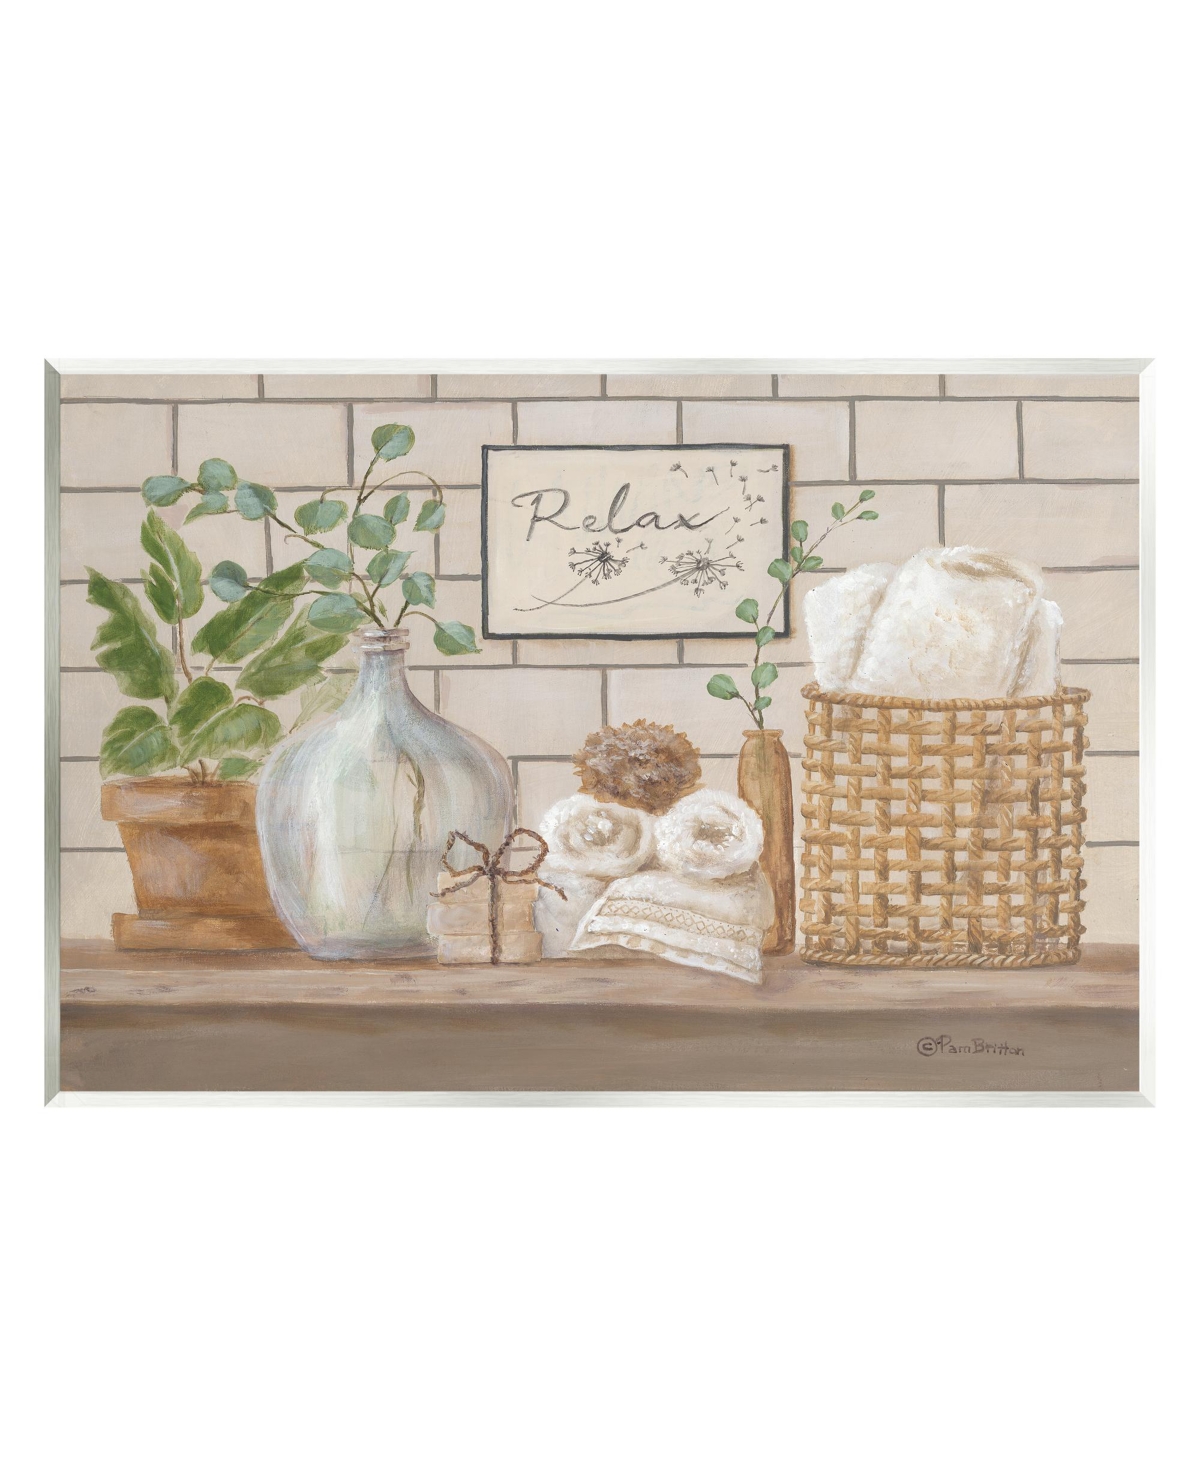 Stupell Industries Relax Uplifting Bathroom Scene Wall Plaque Art, 10" X 15" In Multi-color